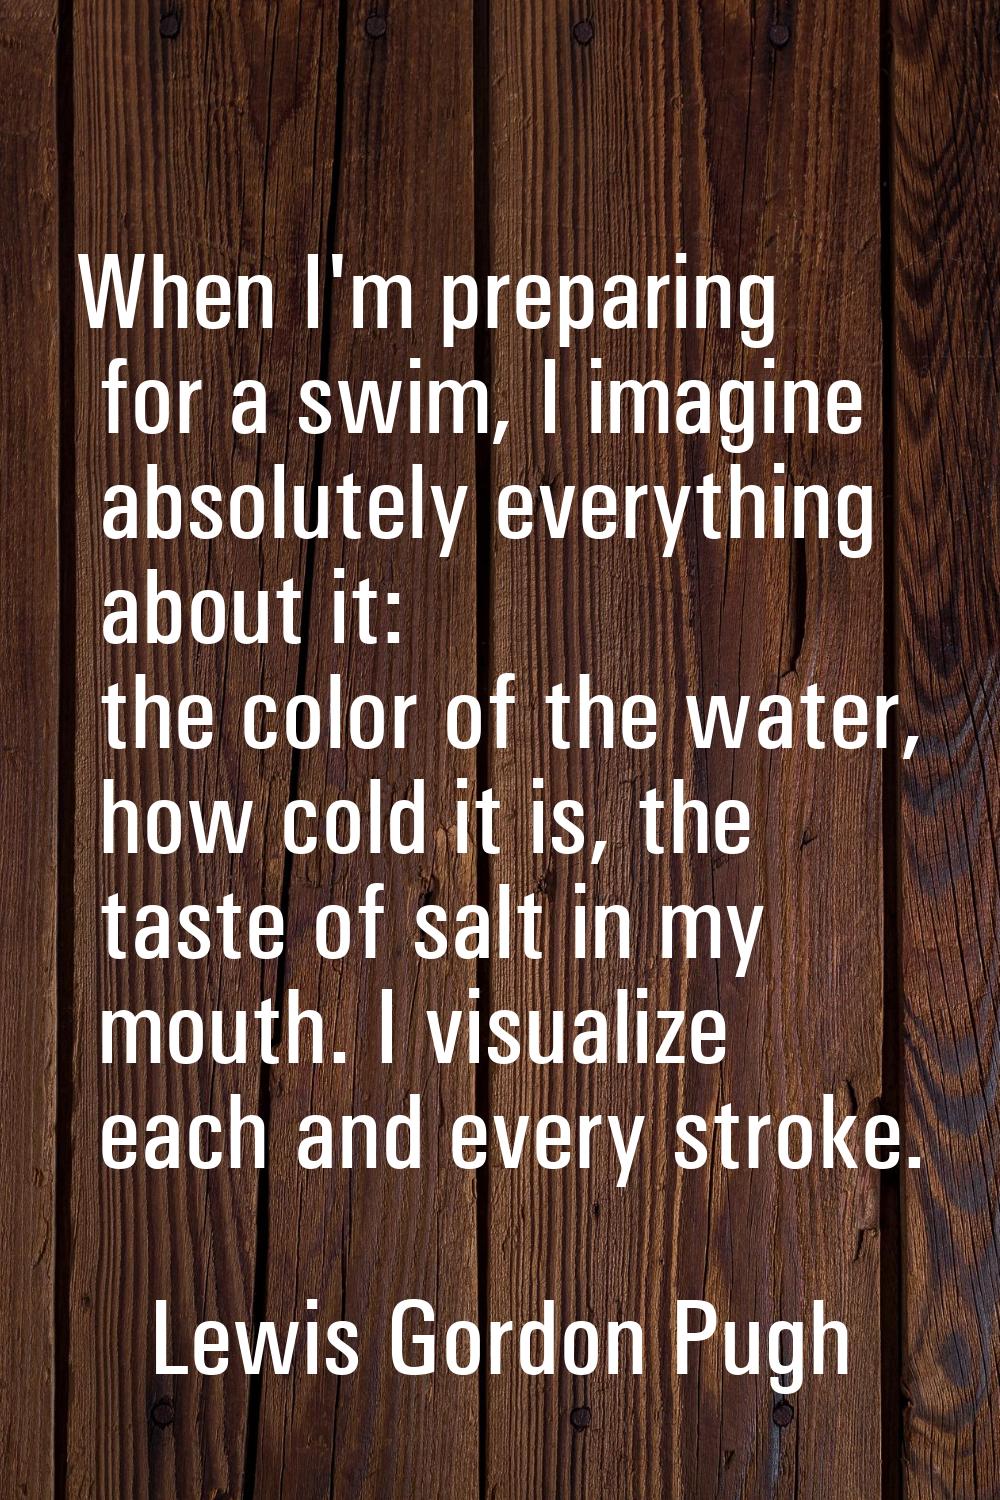 When I'm preparing for a swim, I imagine absolutely everything about it: the color of the water, ho